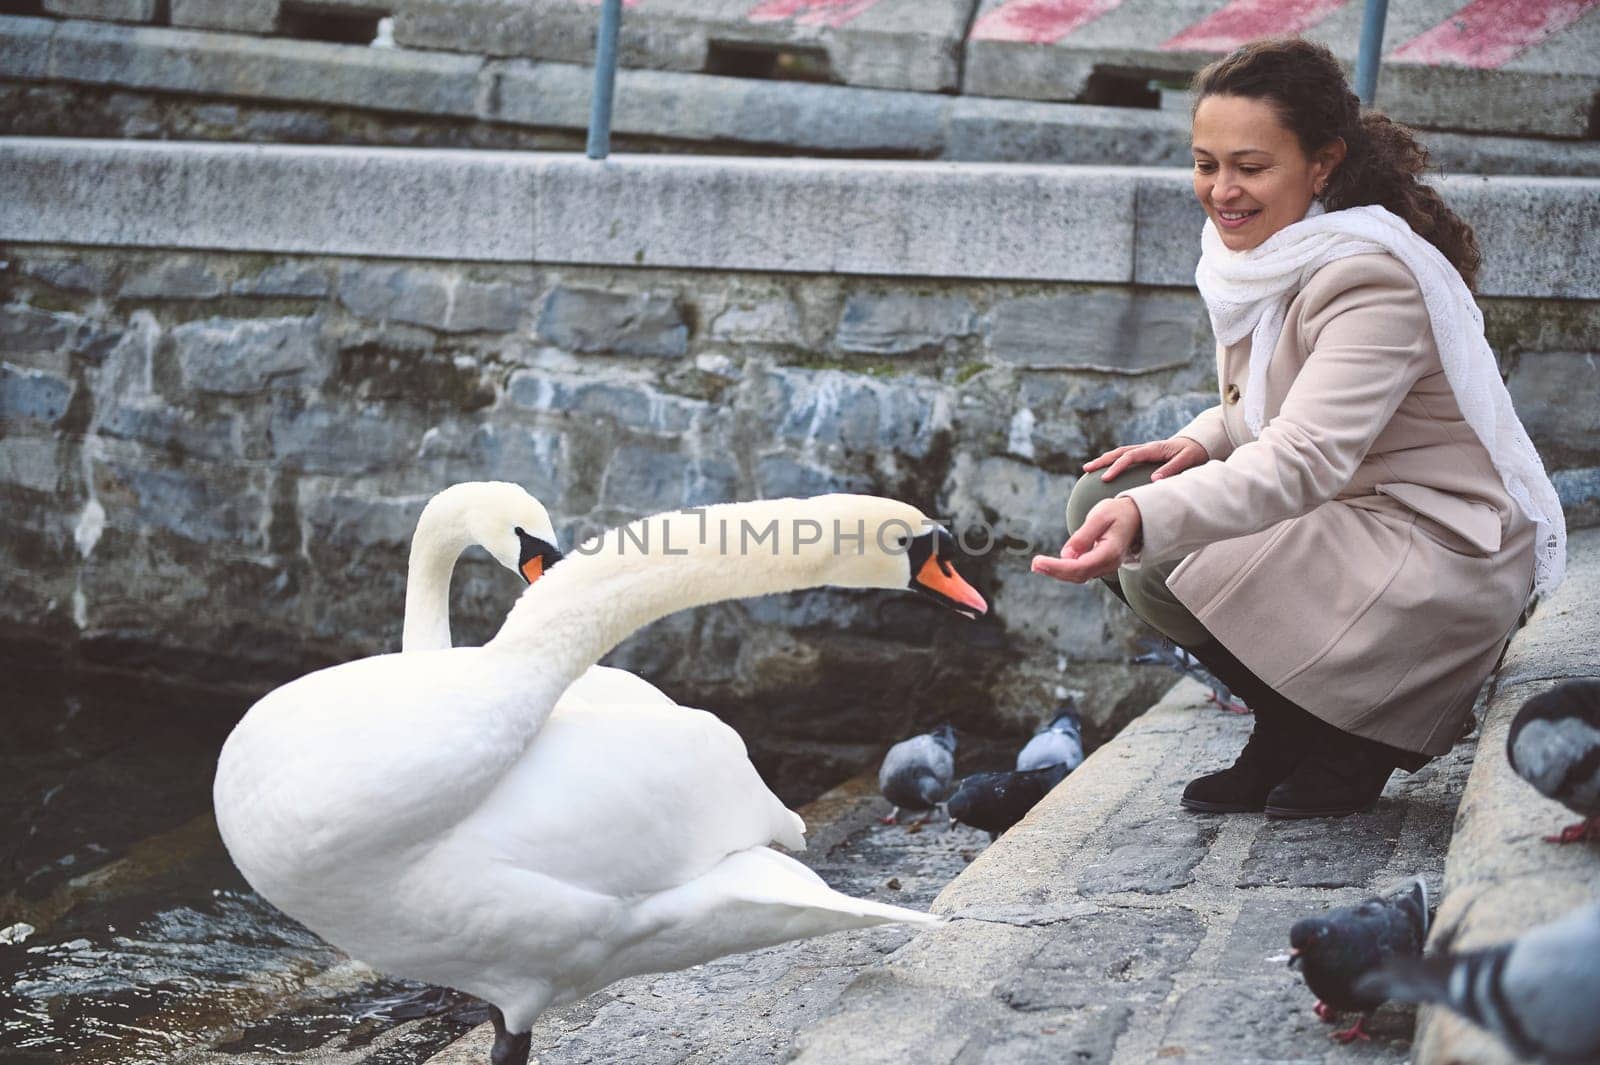 Woman feeding swans and pigeons by the water on a stone path by artgf